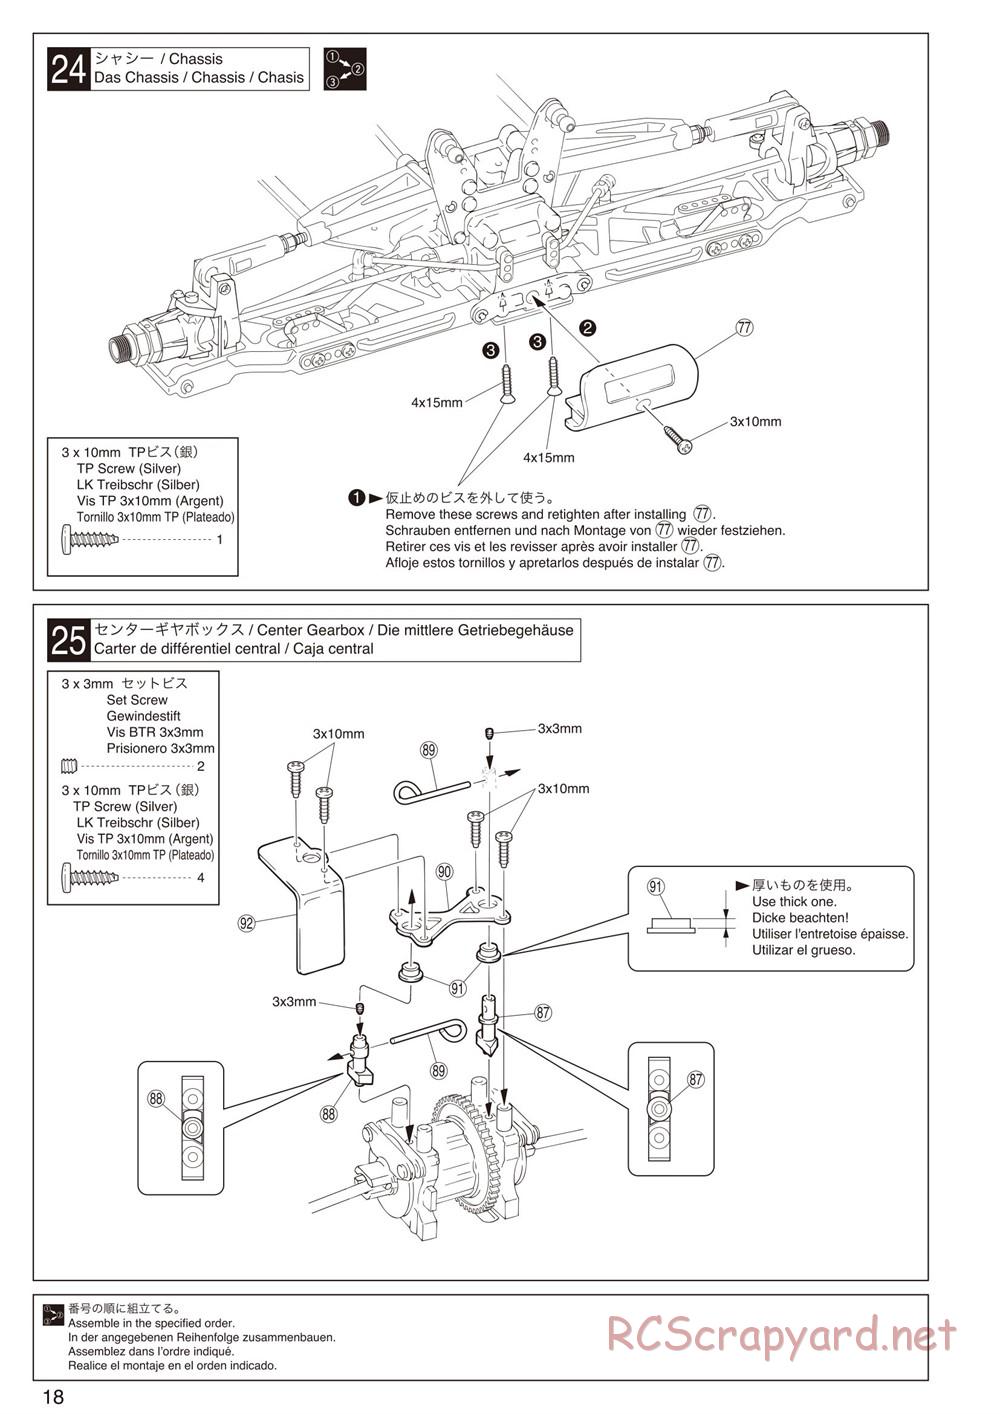 Kyosho - Inferno Neo ST - Manual - Page 18